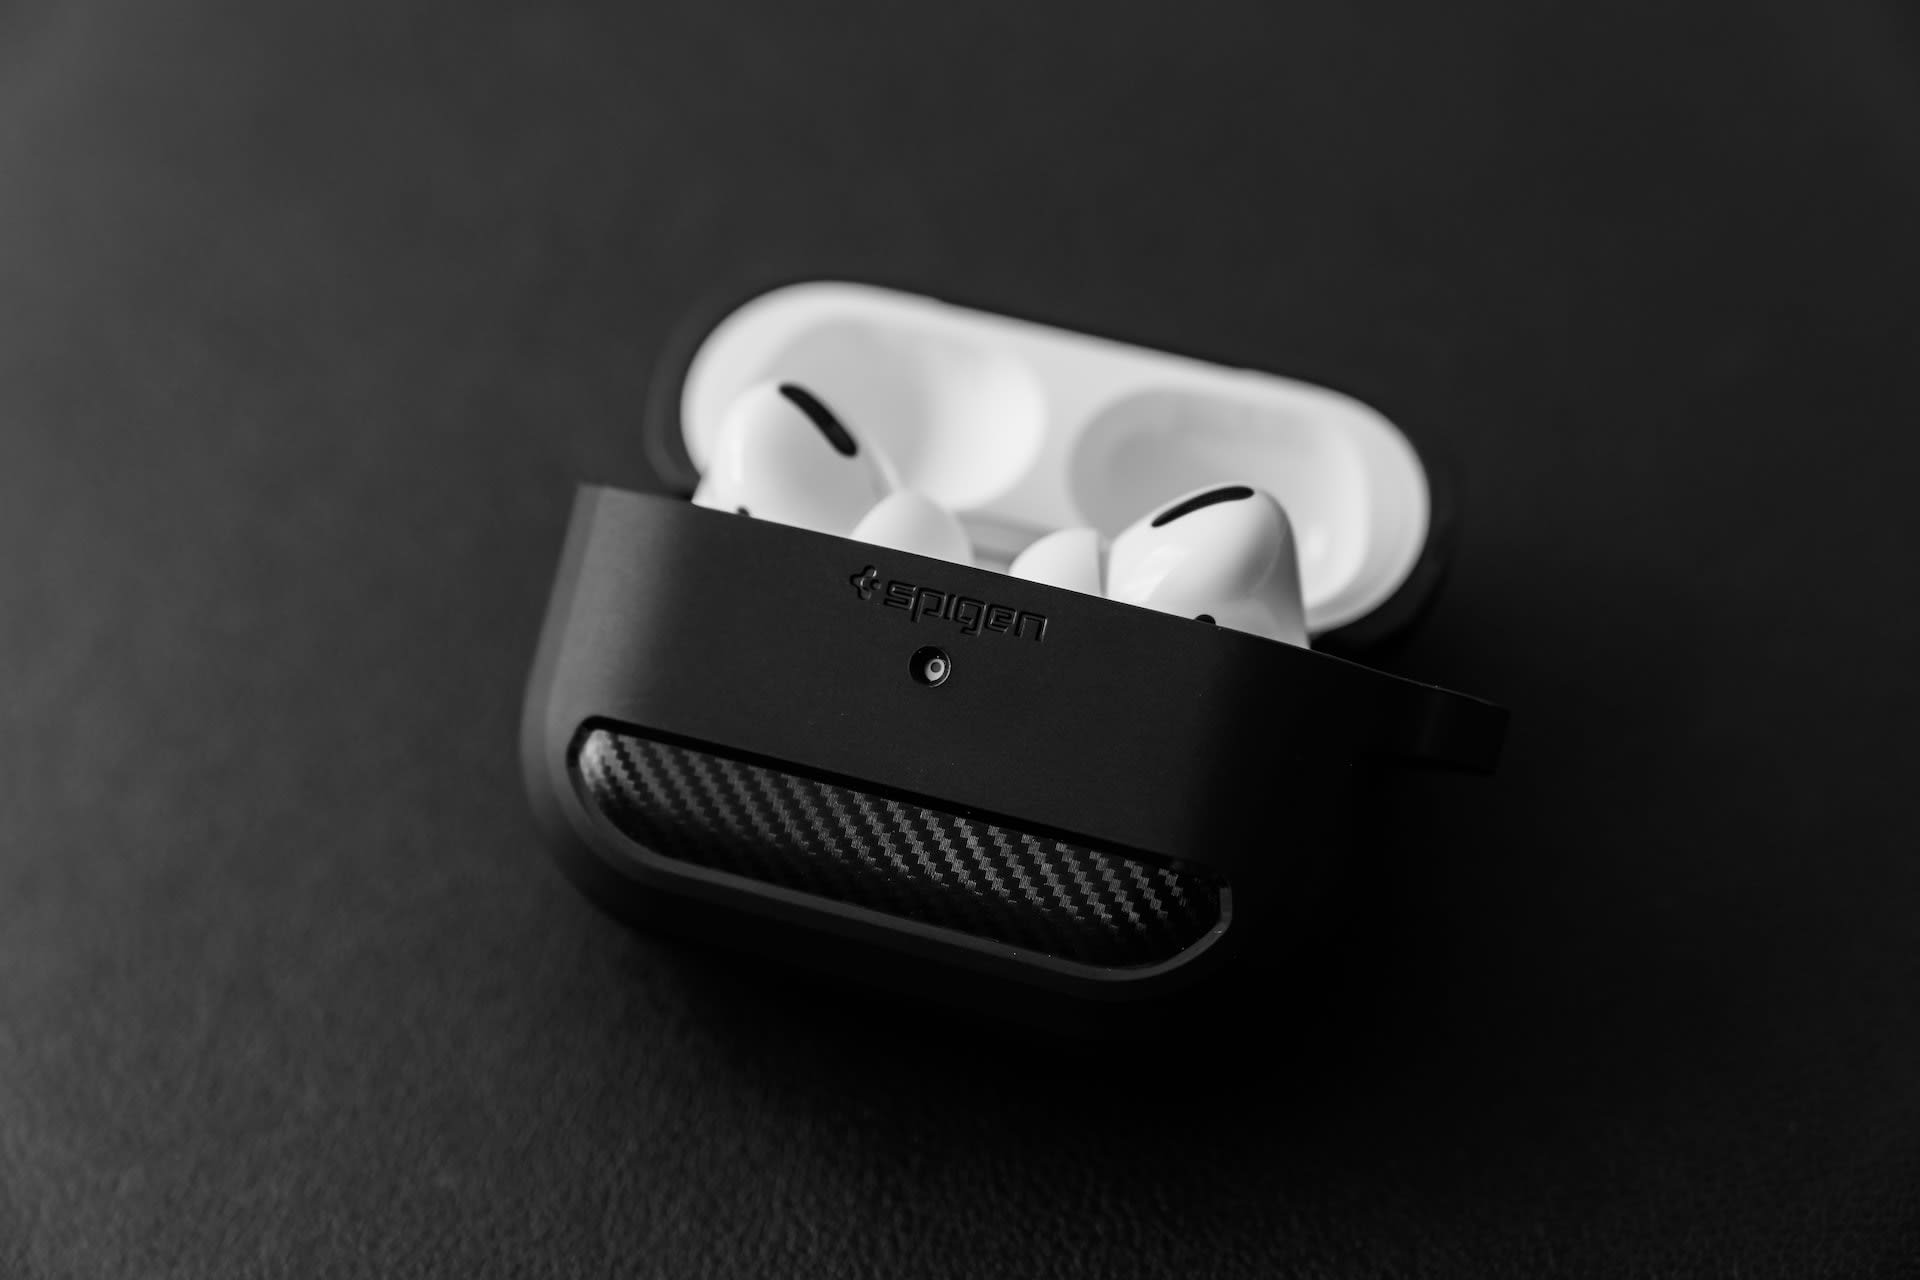 Airpods in a black protective case